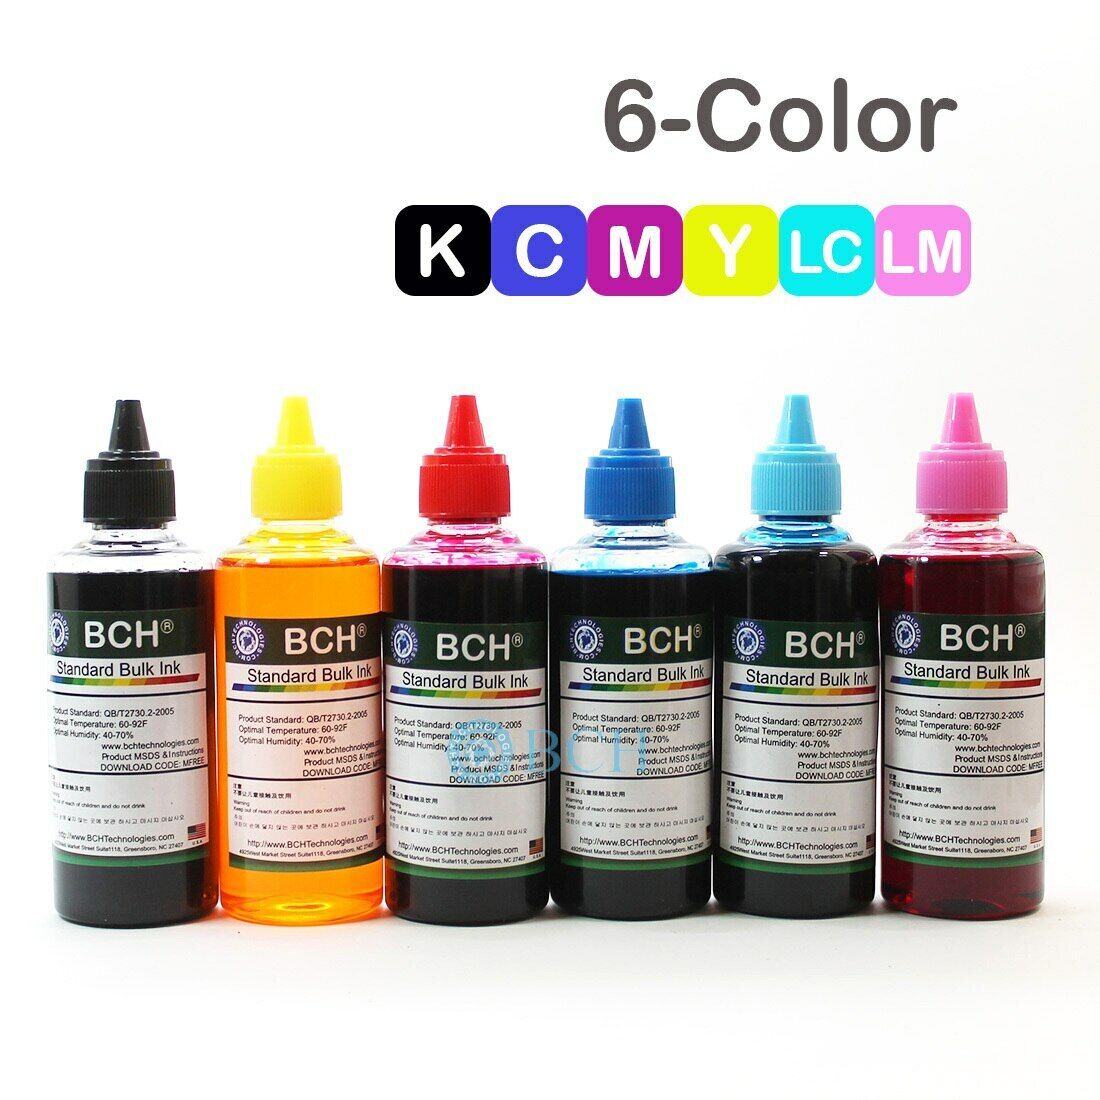 Standard 600 ml 6-Color Refill Ink for All Printers (KD600X-CU-LCLM)